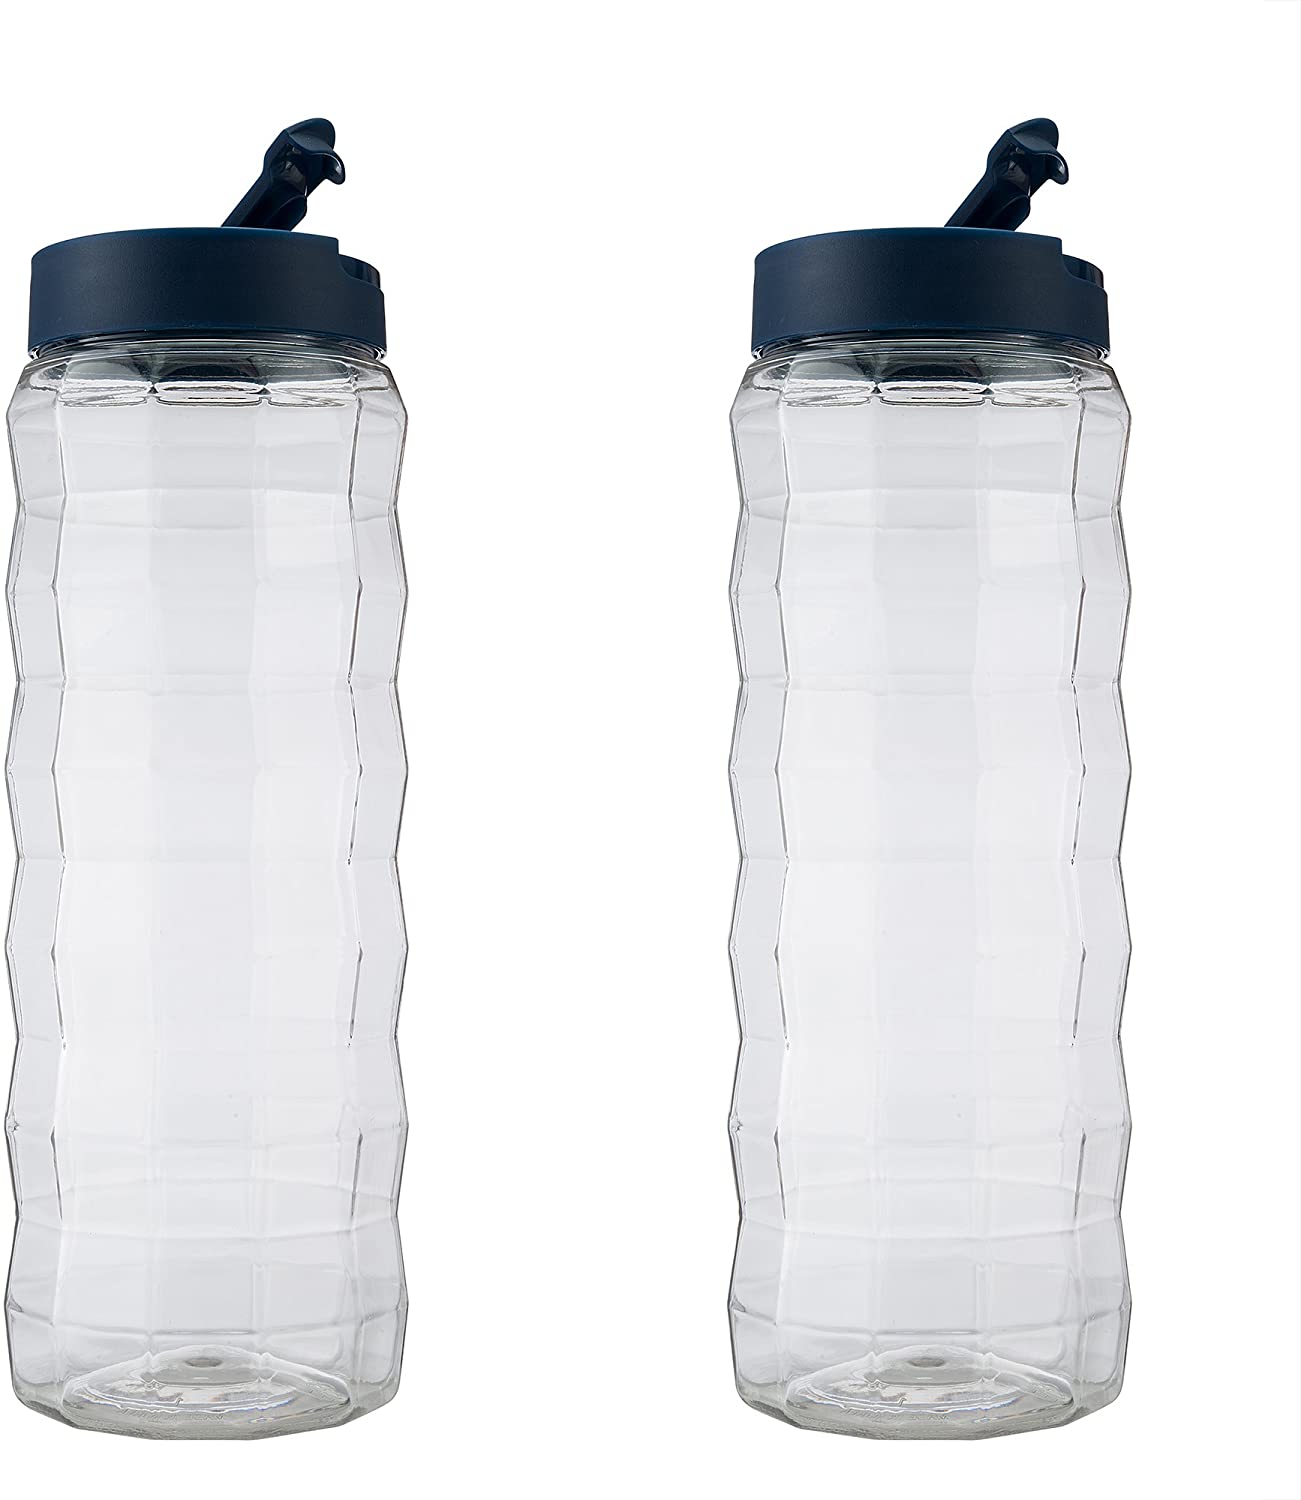 Komax Edge Beverage Bottle, 1.5 L - Whole and All